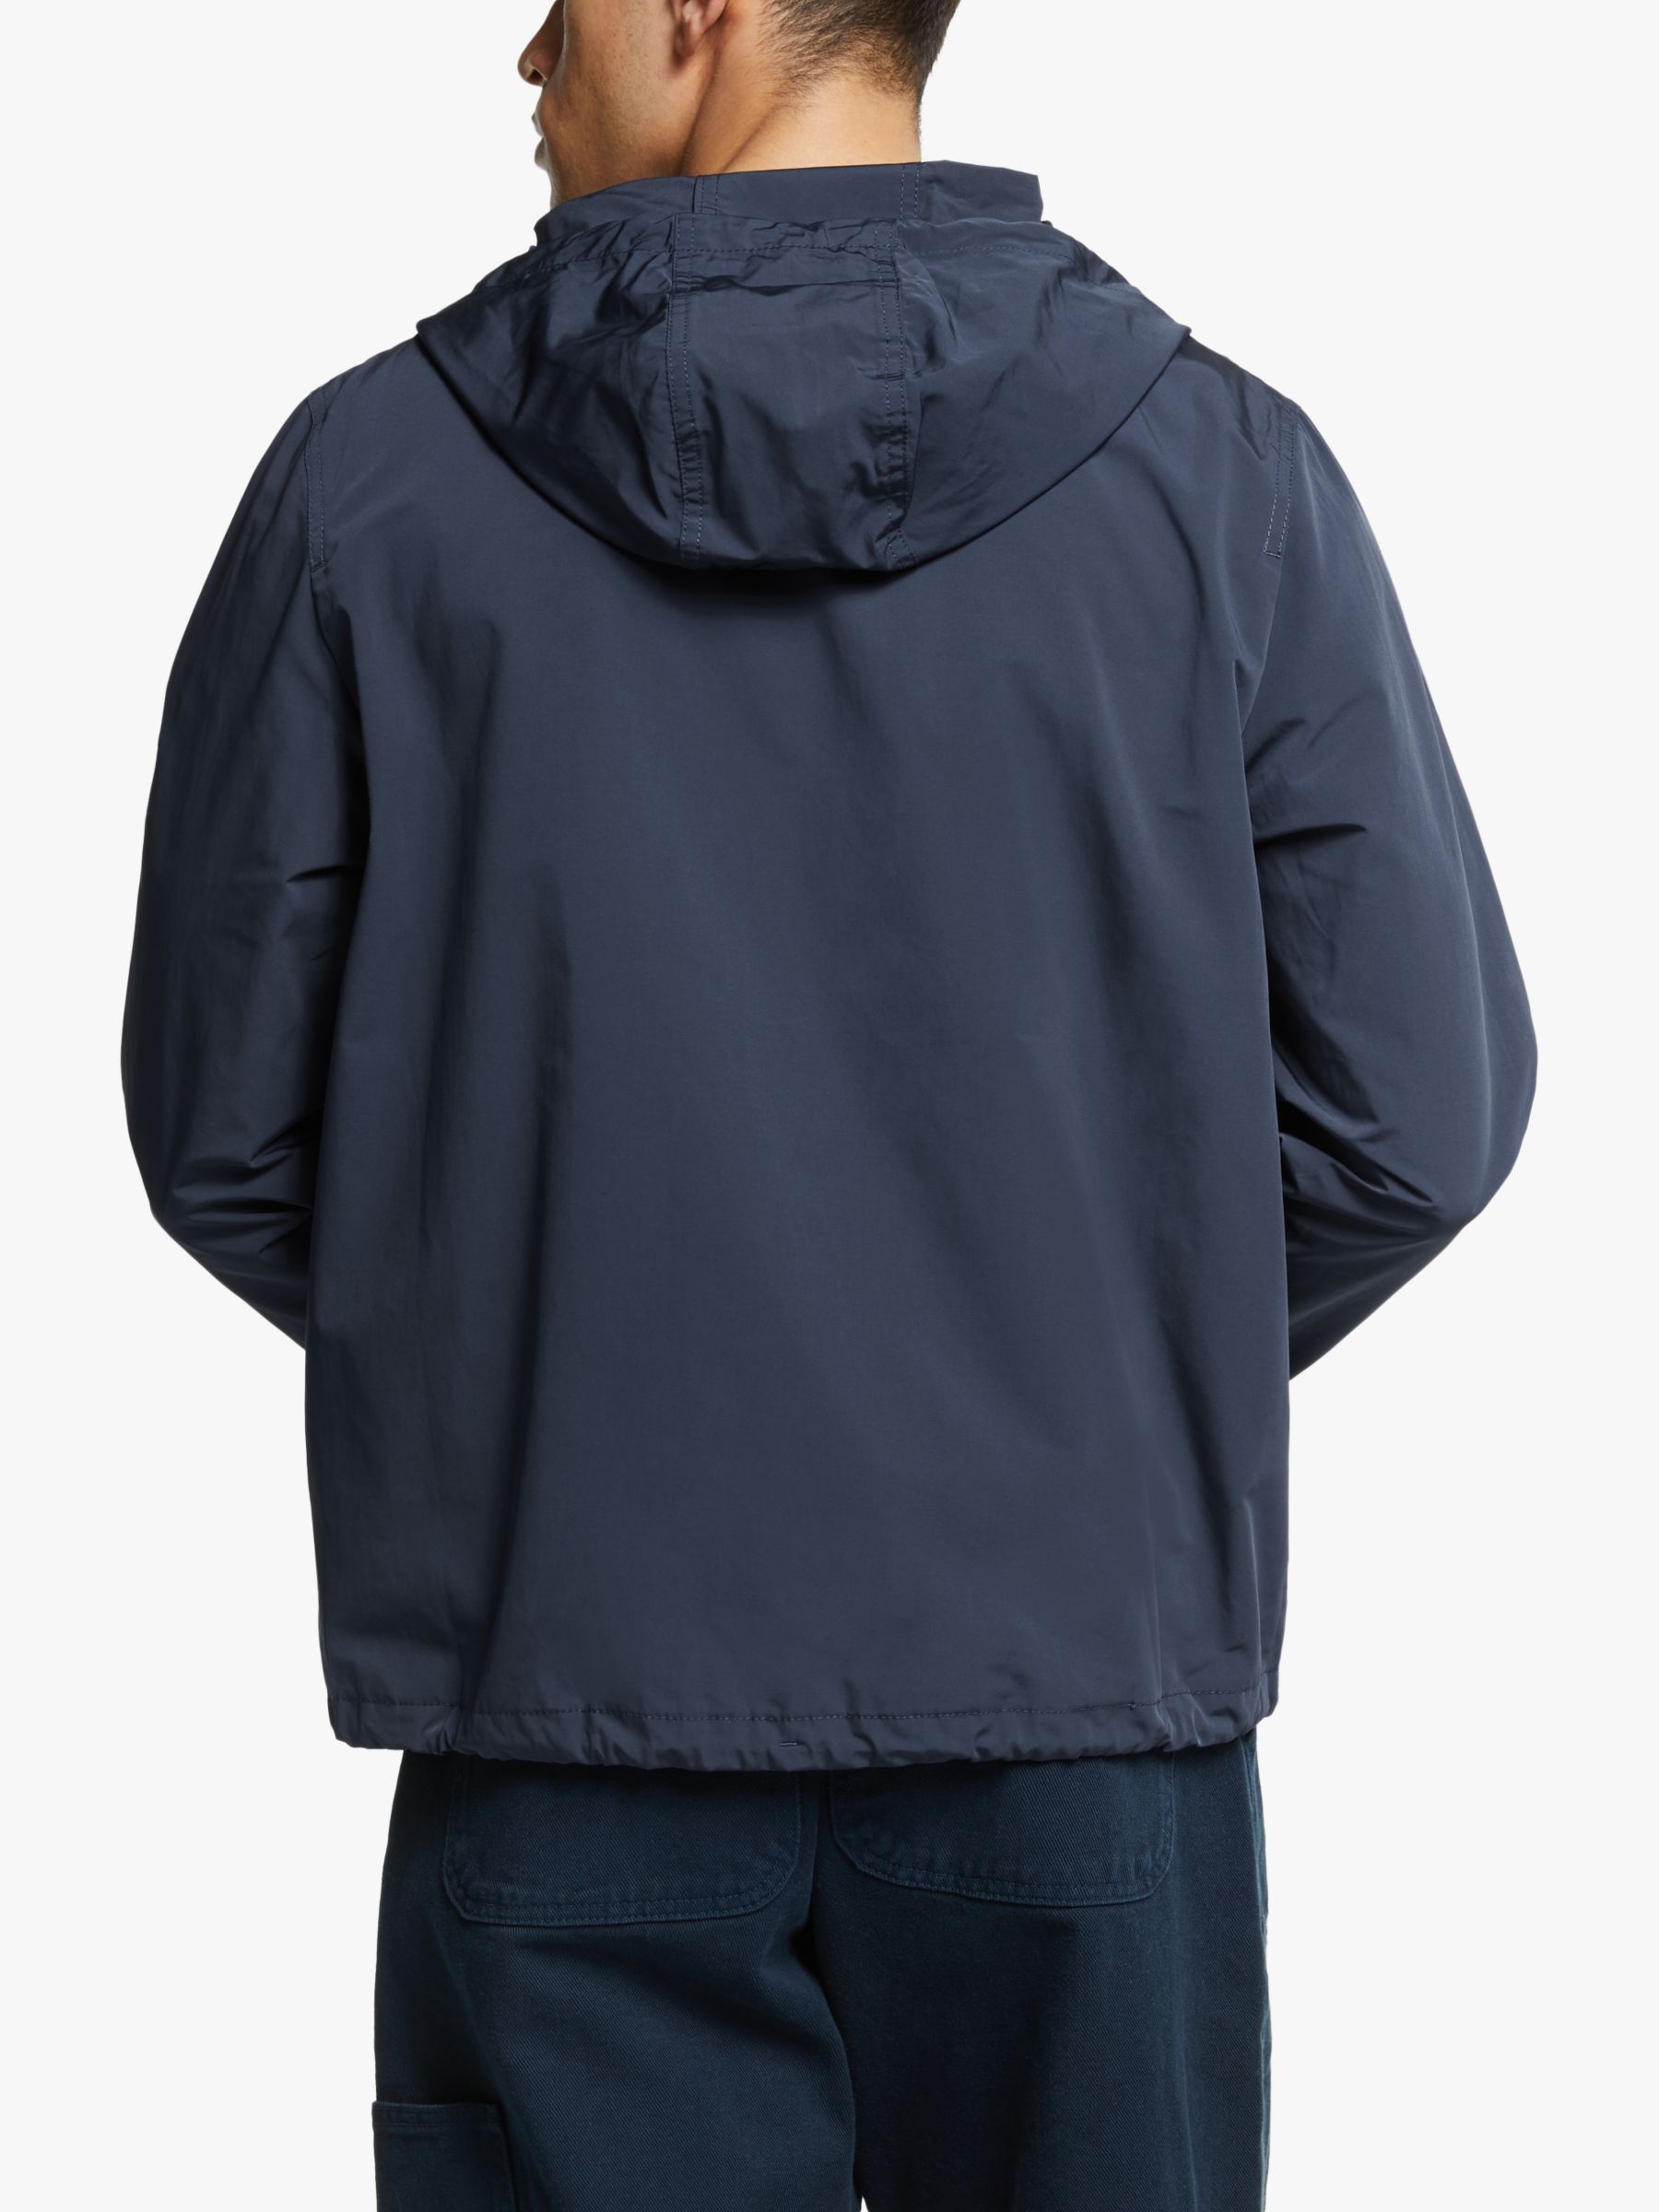 Albam Utility Classic Hooded Cagoule Jacket, Navy